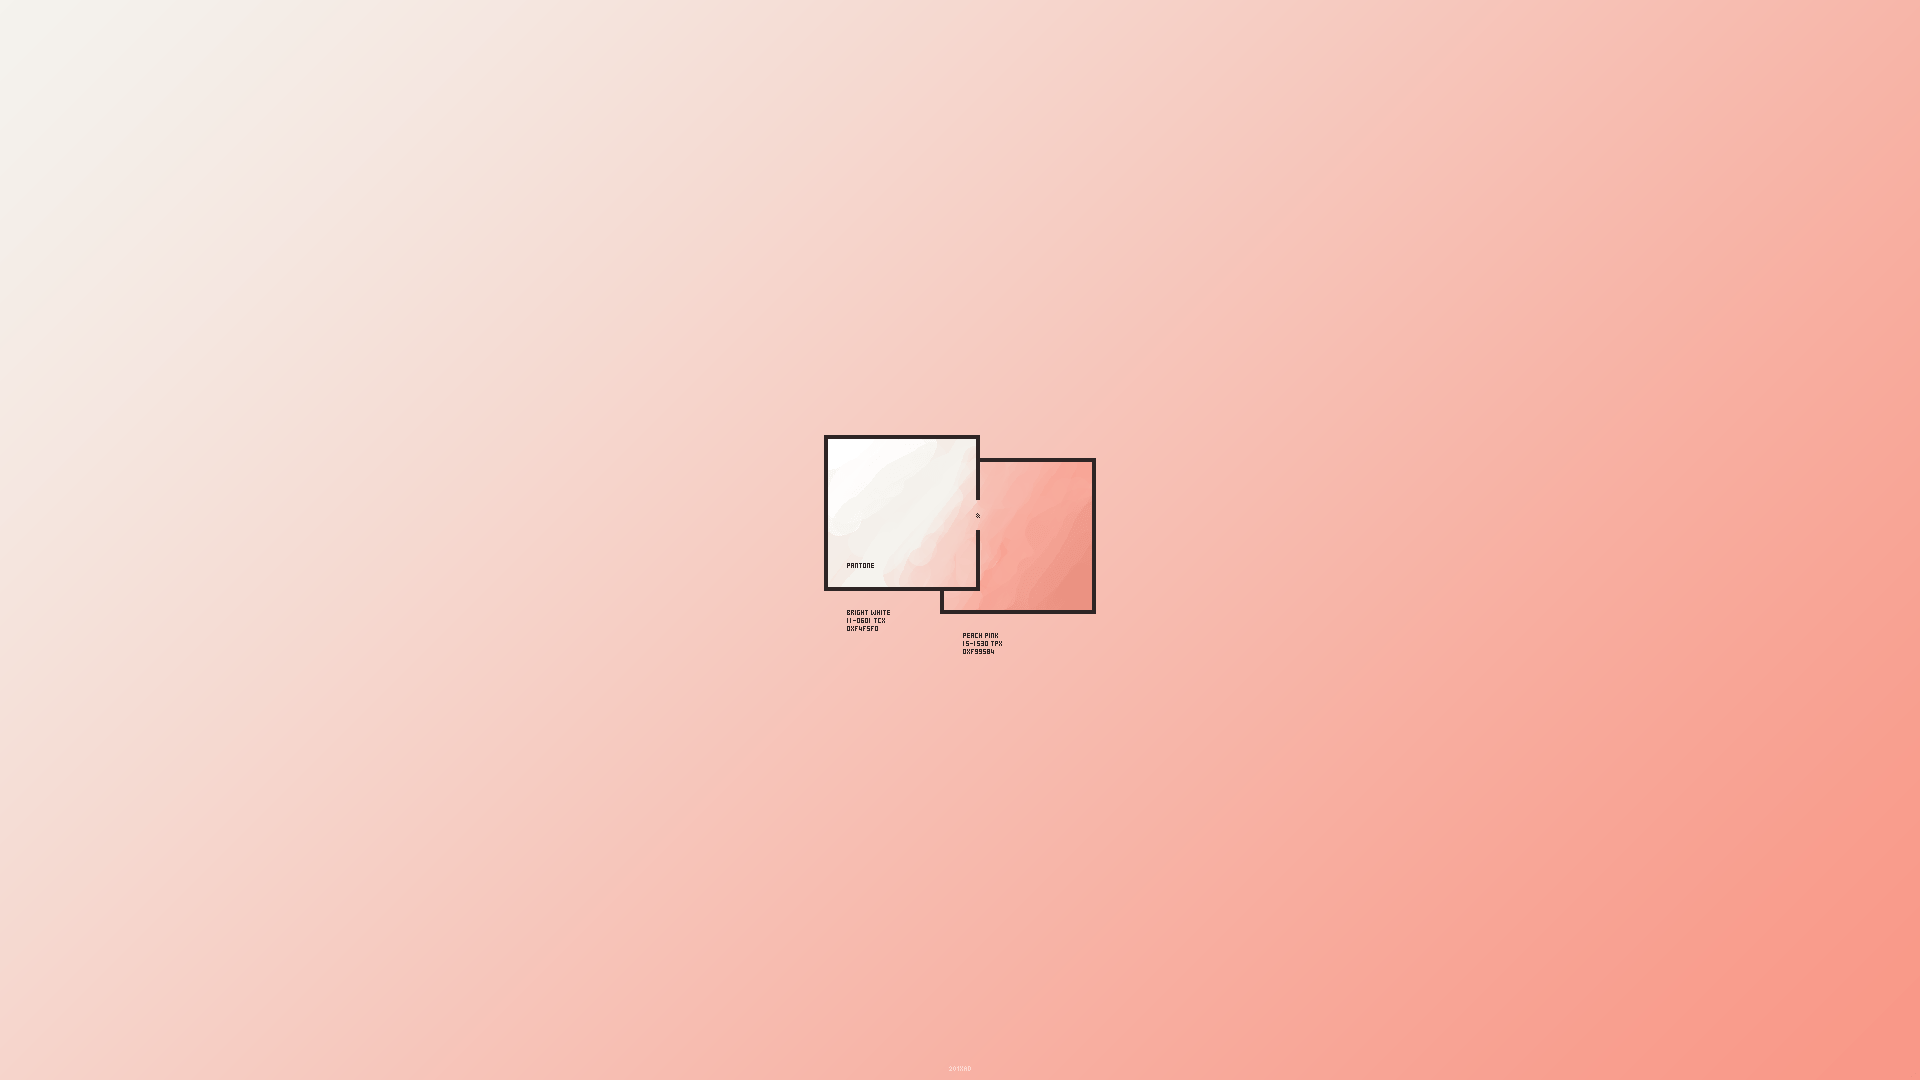 A pink and white gradient background with a square graphic in the center - Minimalist